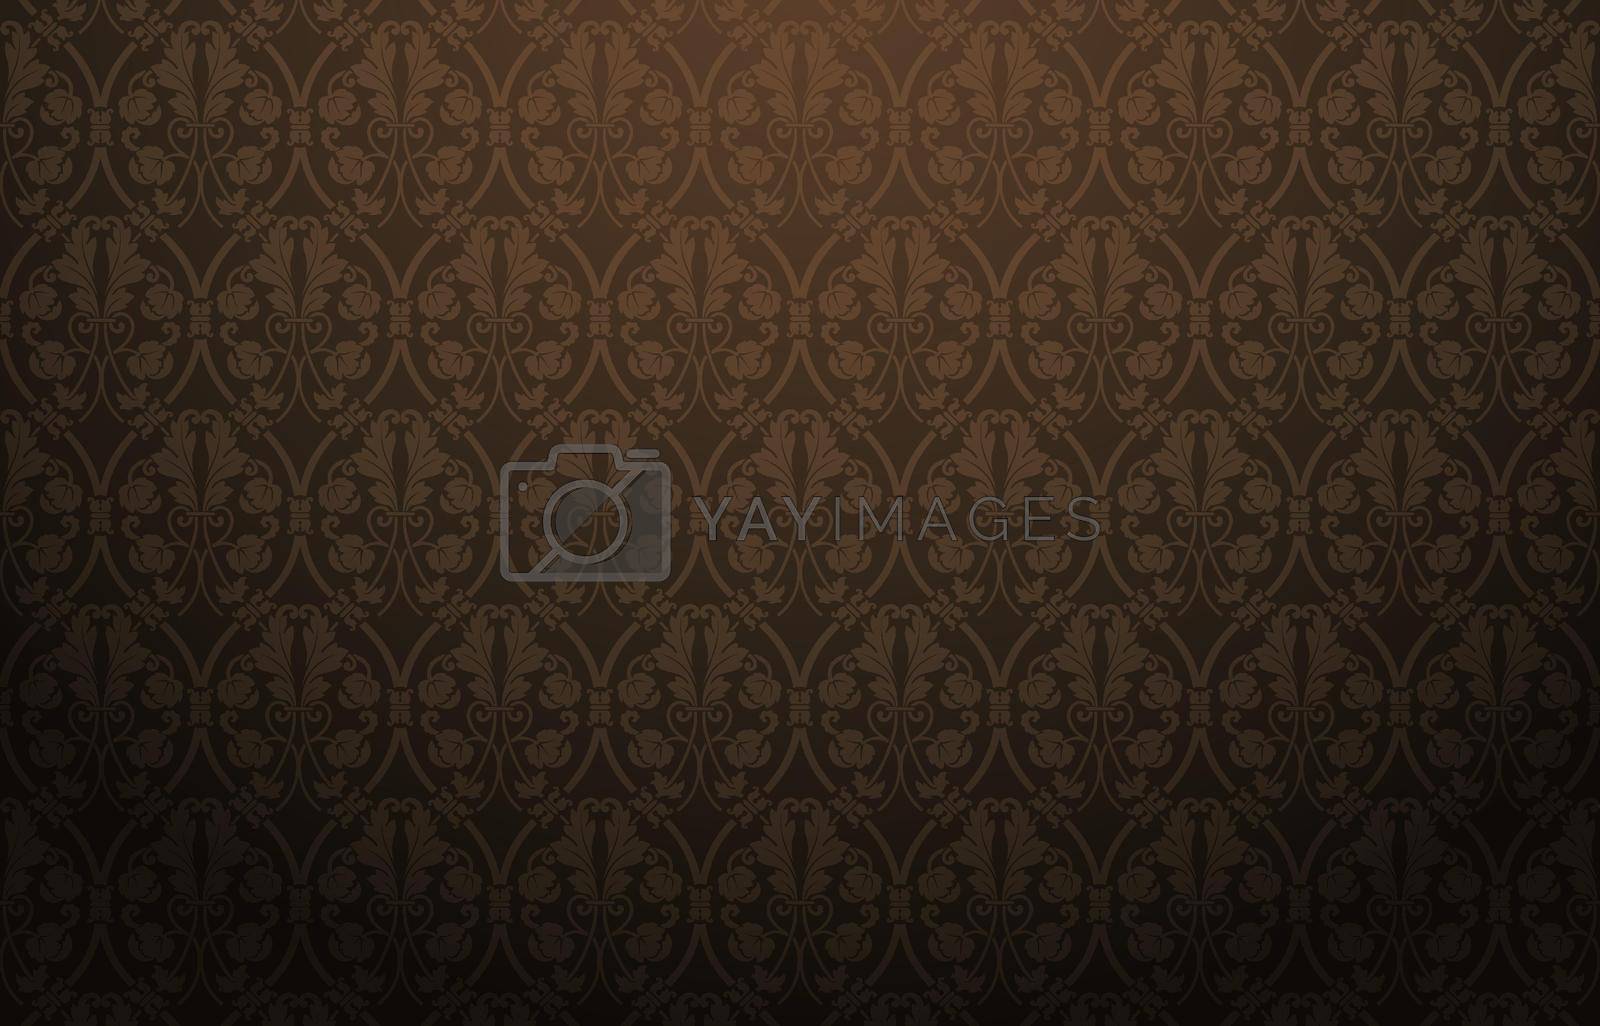 Royalty free image of Damask black, Damask Pattern Black, Background pattern ornament, Black damask background with seamless pattern in the style of Baroque, for wallpapers, fabric print, textile, packaging design product by chagiya1818